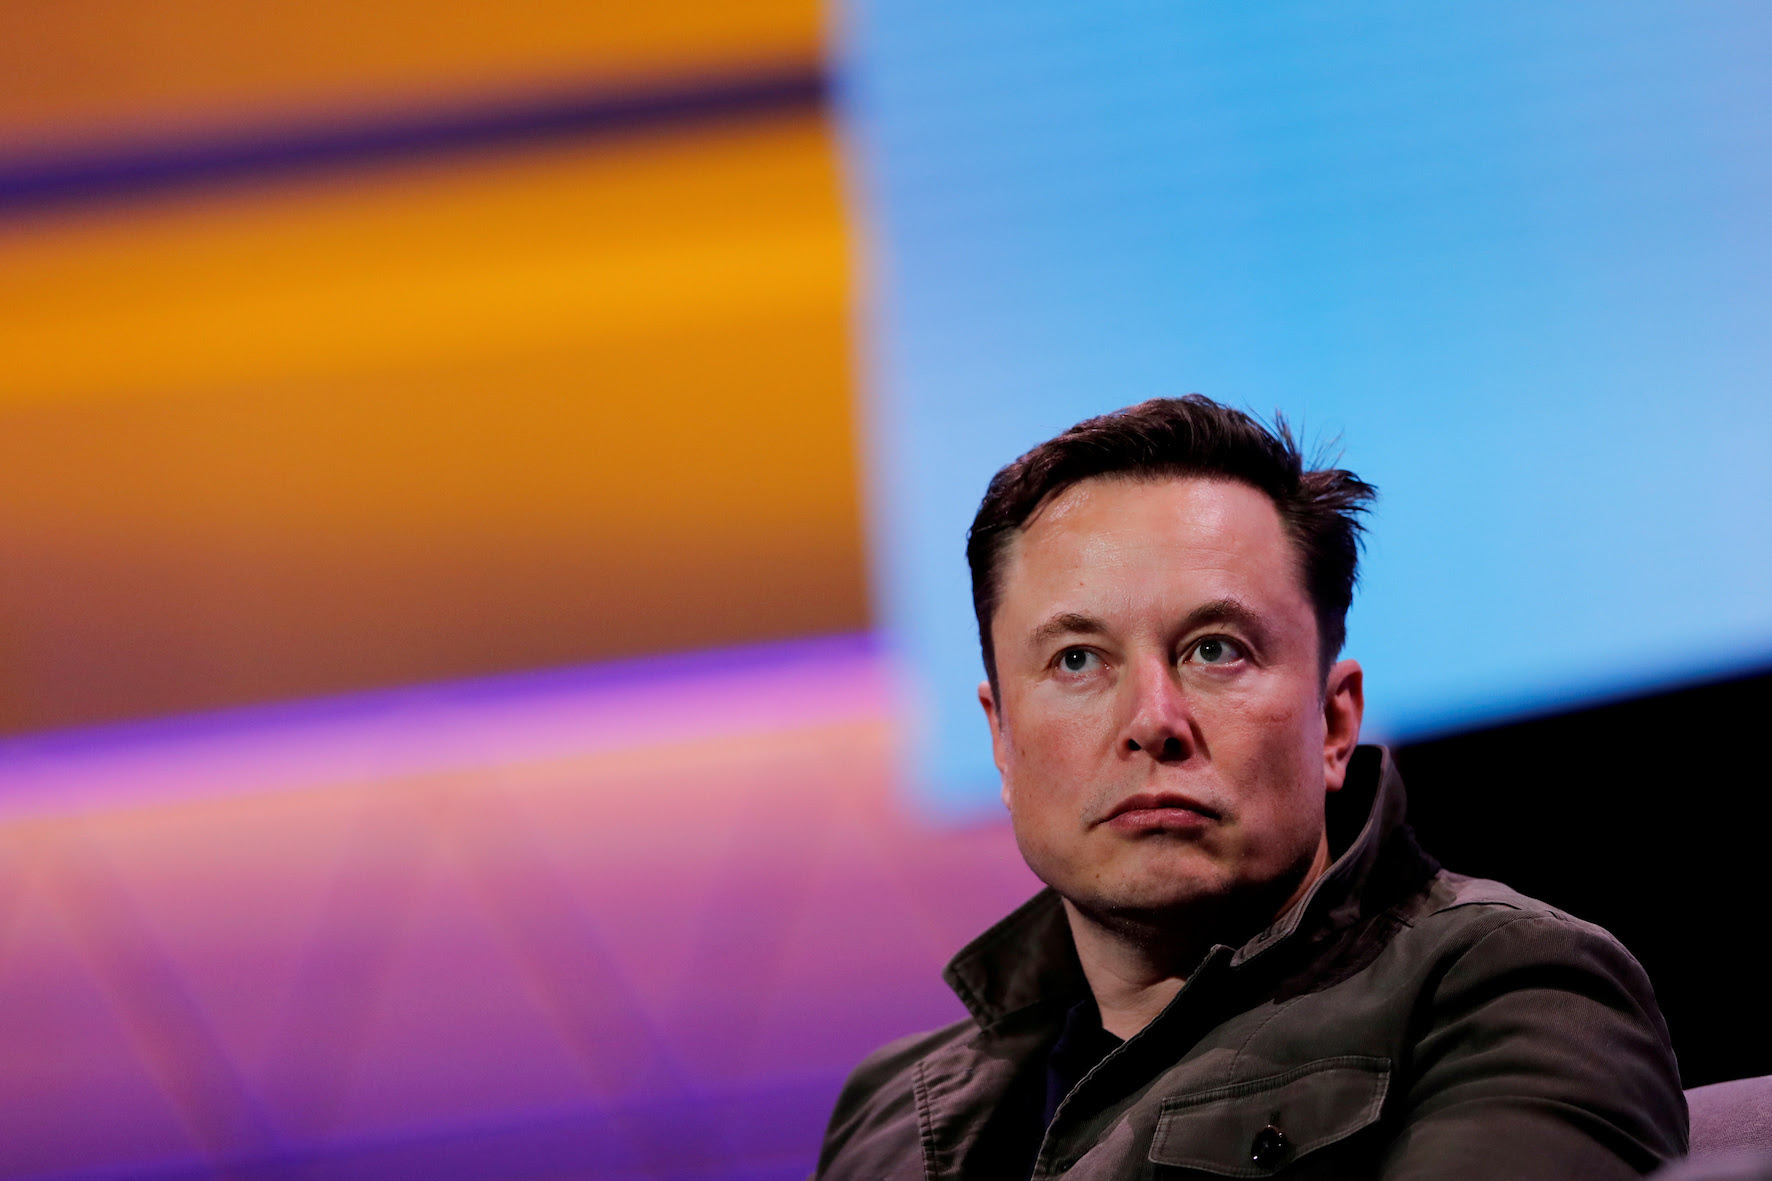 Neuralink, SpaceX owner and Tesla CEO Elon Musk speaks at the E3 gaming convention in Los Angeles.